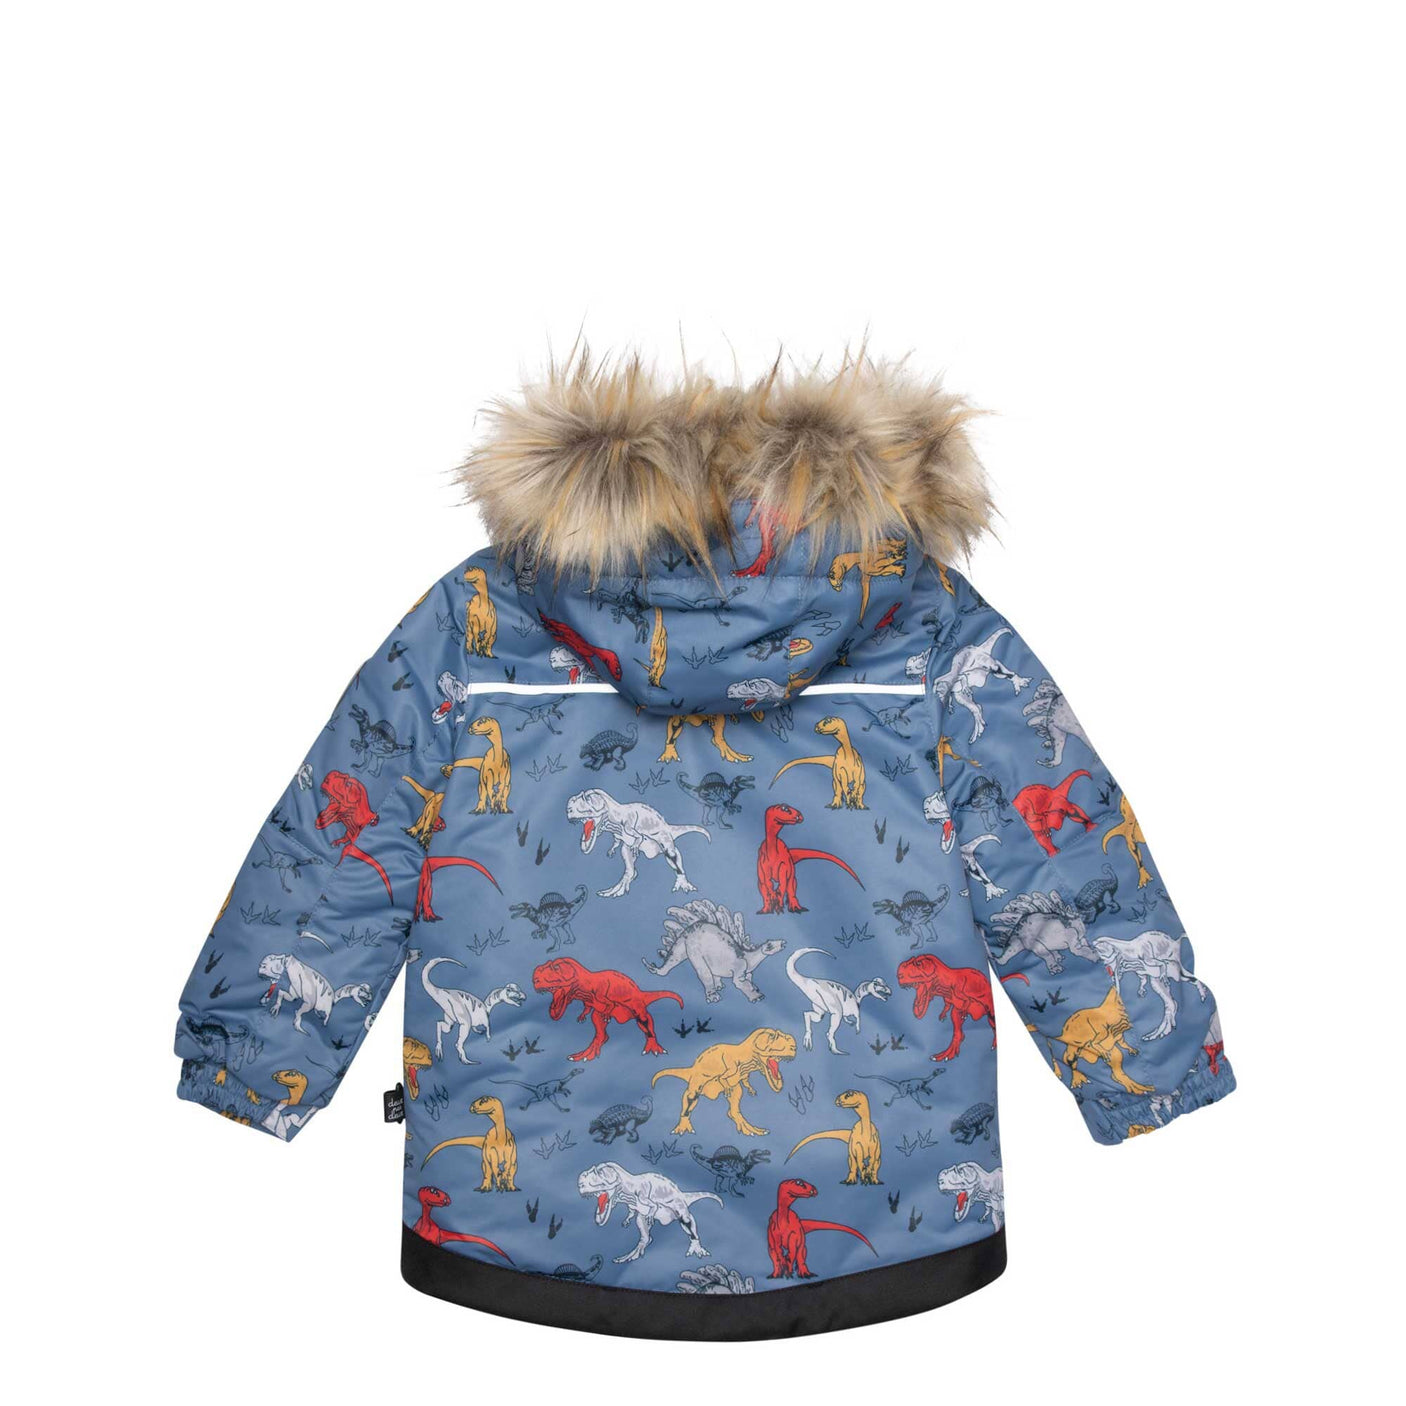 Two Piece Baby Snowsuit Harvest Gold With Dino Print-2